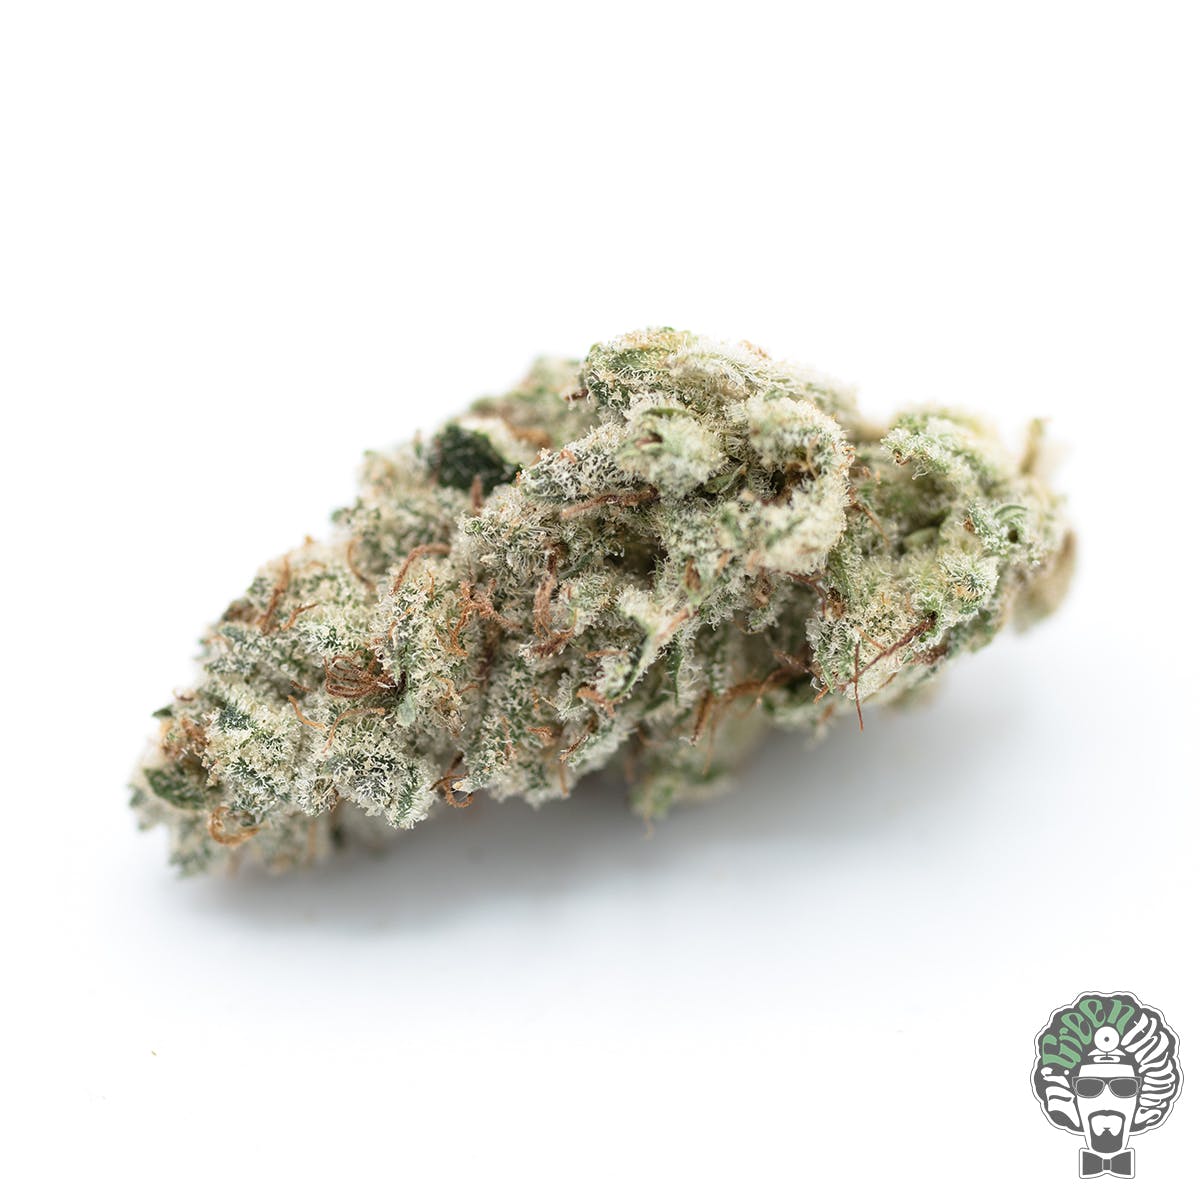 sativa-sale-watermelon-lime-by-nameless-genetics-x-cookies-collab